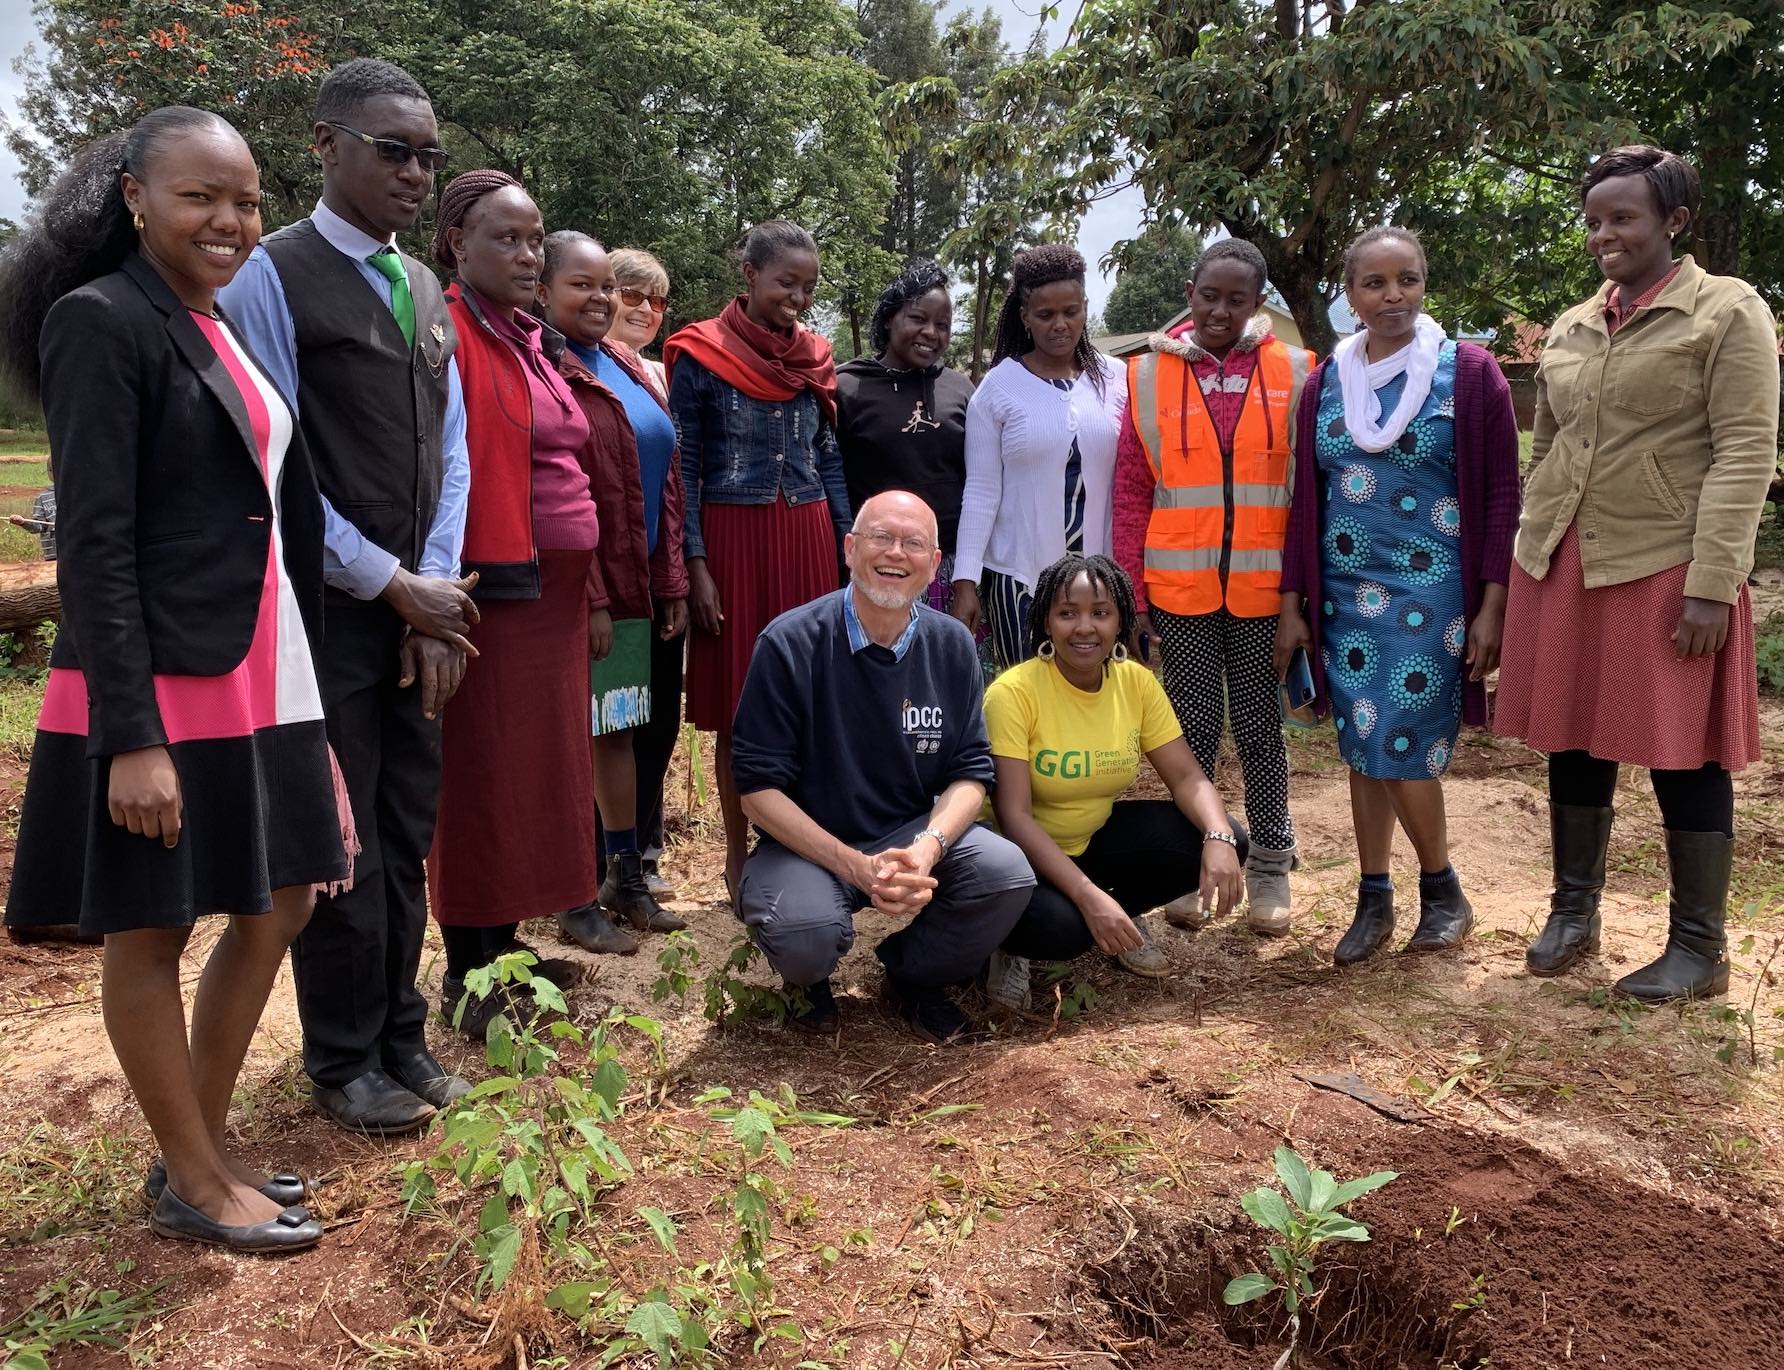 Tree planting with Elizabeth Wathuti (Green Generation Initiative) and children from the region of Nyeri, Kenya, June 2023. Photo : PwG (CC-BY).